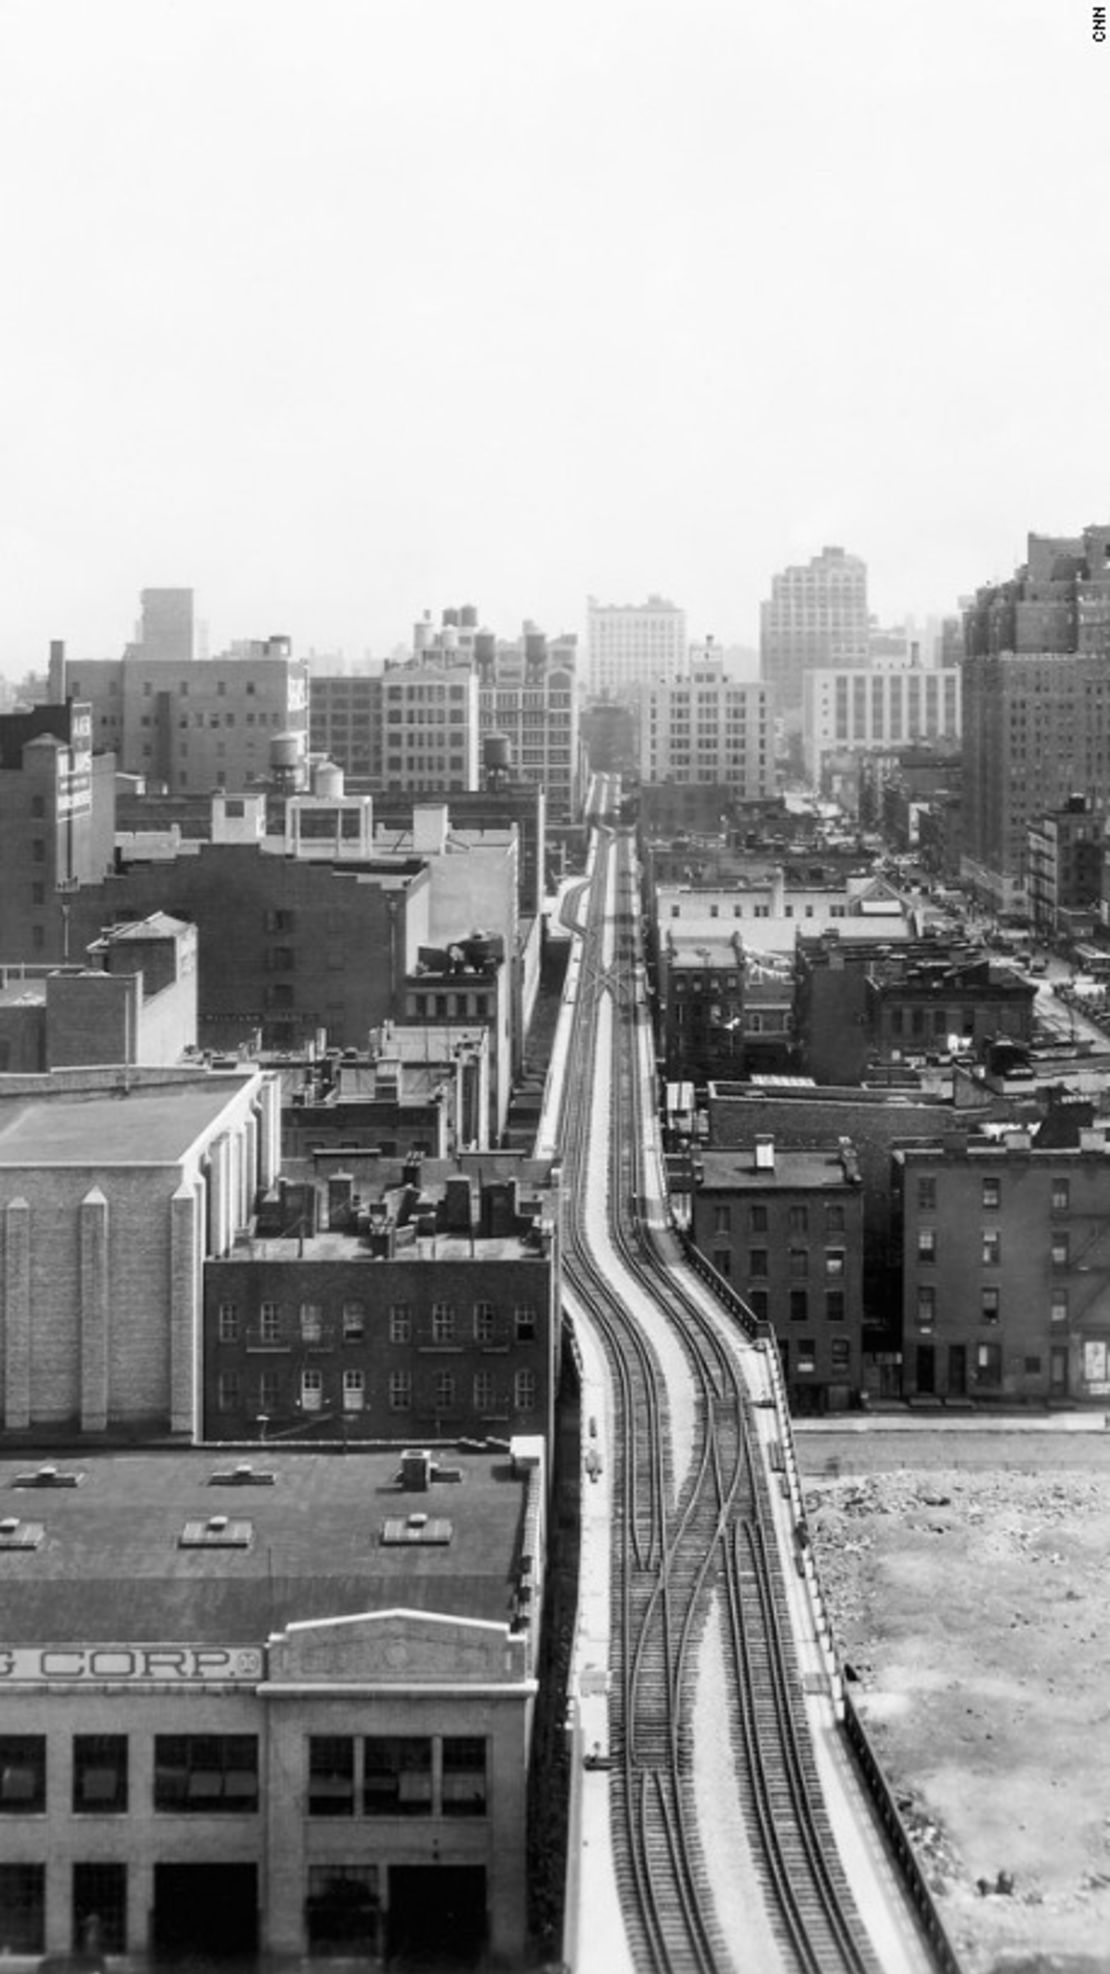 What the New York High Line used to look like. The 1.45-mile (2.33km) elevated section of the line was abandoned in 1980.